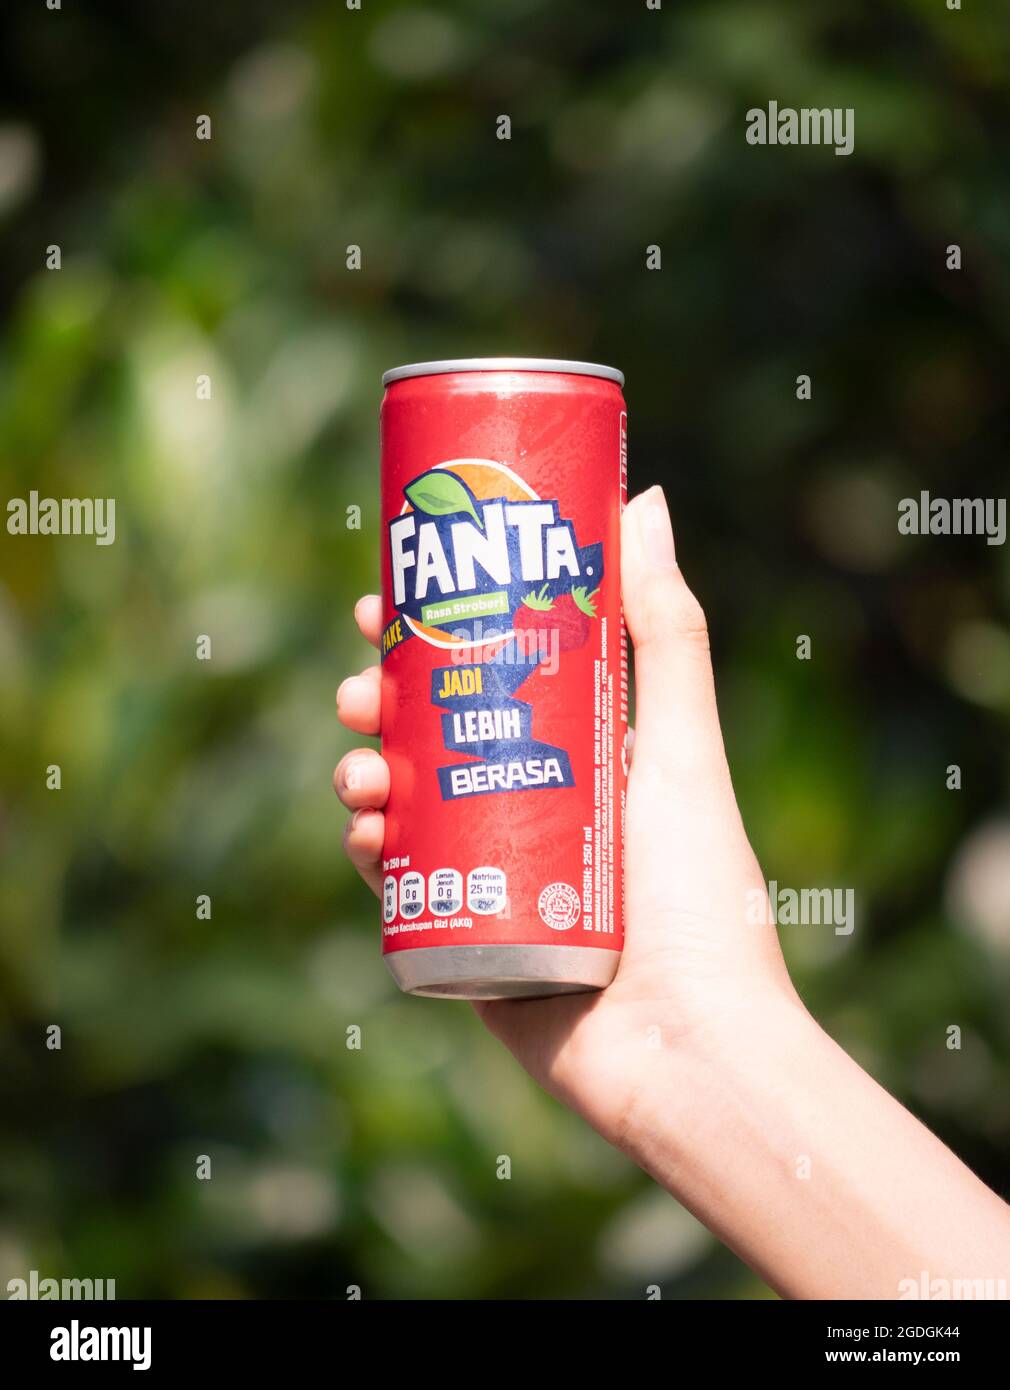 Jakarta, Indonesia-August 13, 2021: close up of a hand holding a soft drink can on a blurry leaf background Stock Photo